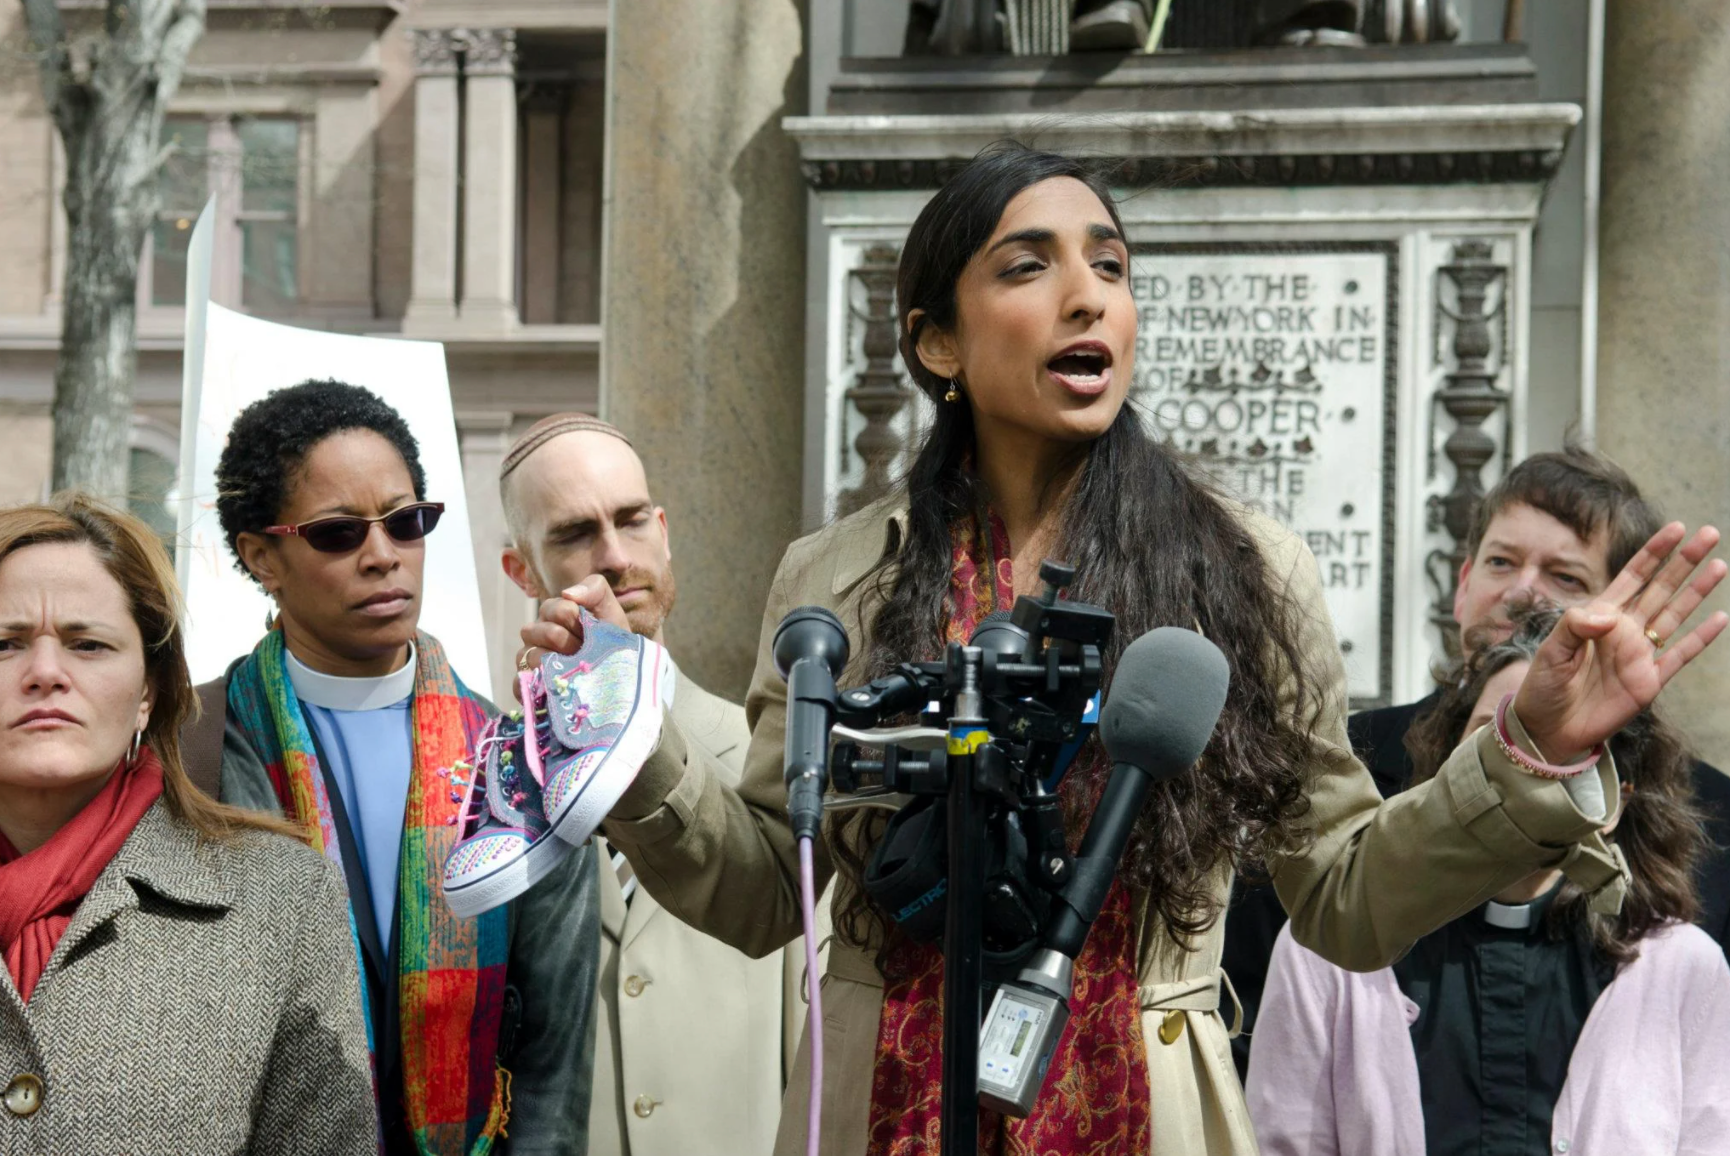 Valarie Kaur speaks at a protest in 2017 (courtesy of Valarie Kaur)